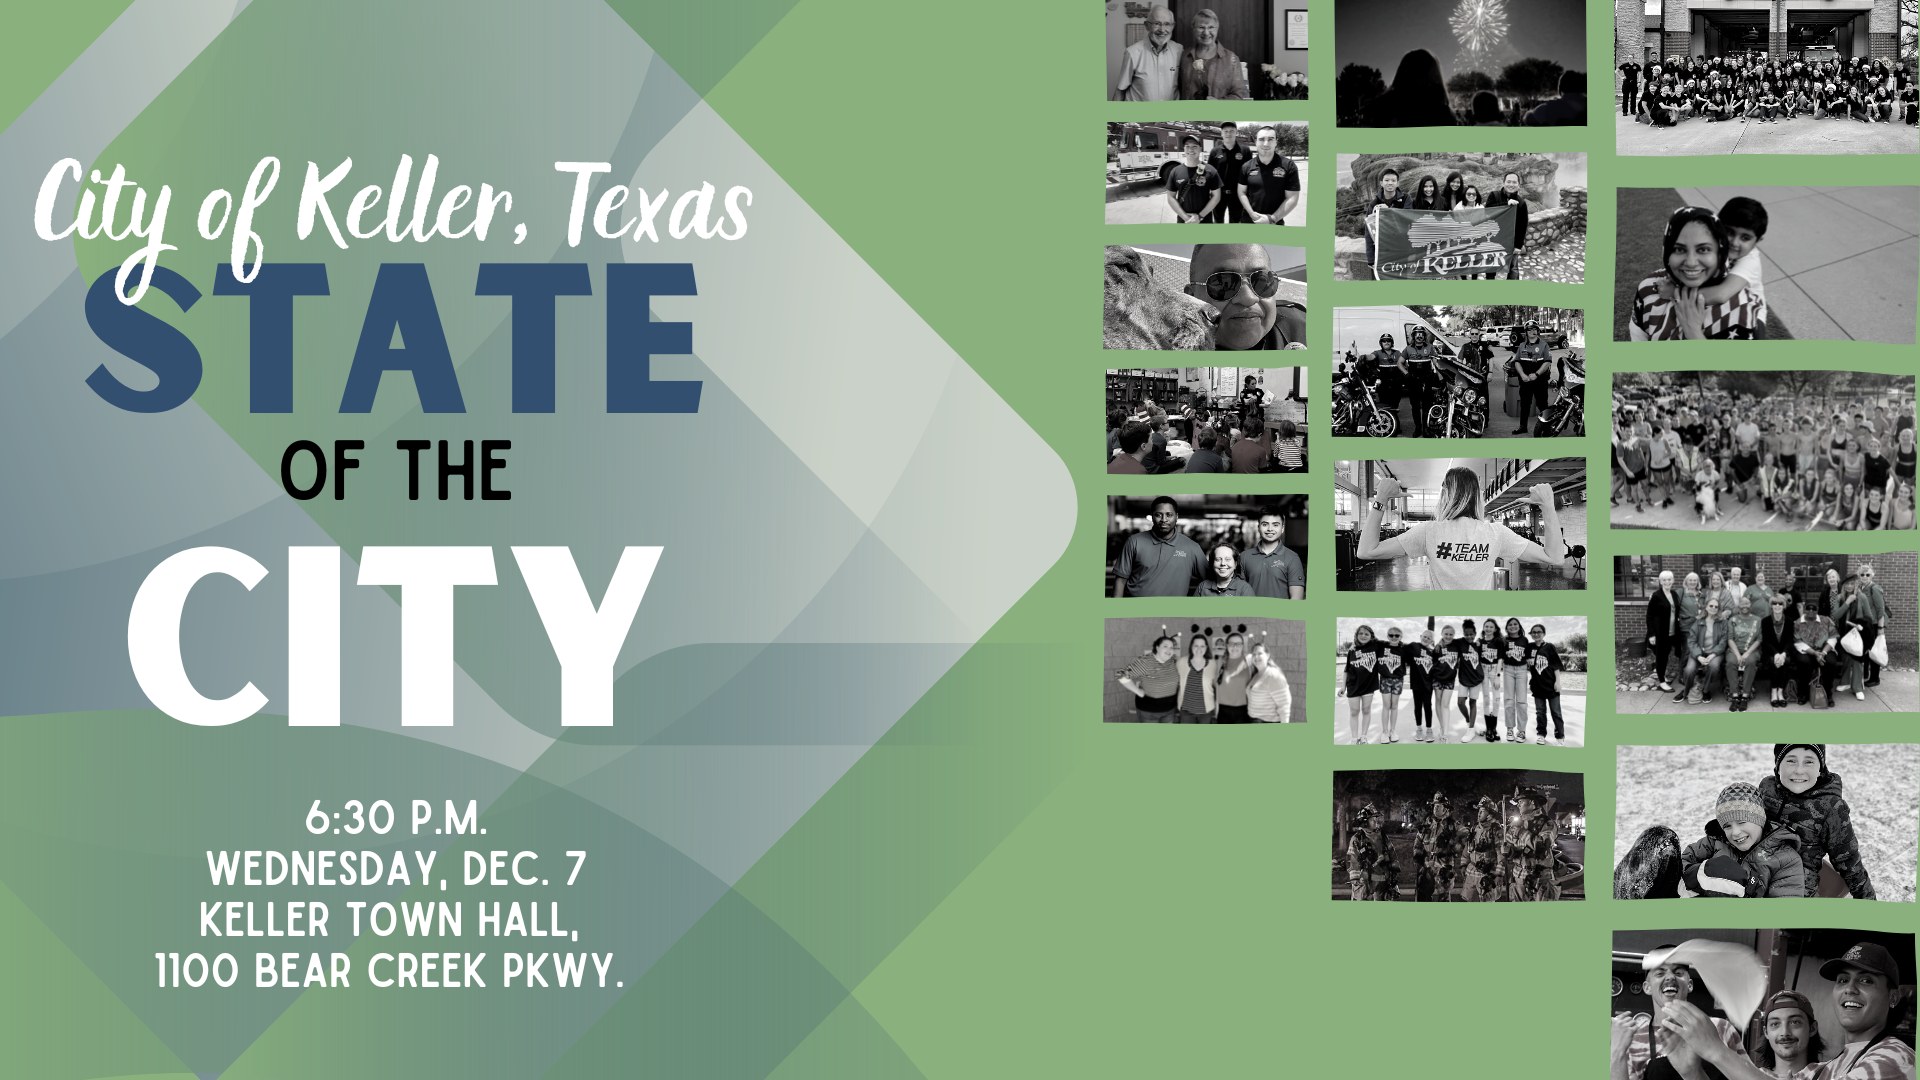 City of Keller: State of the City